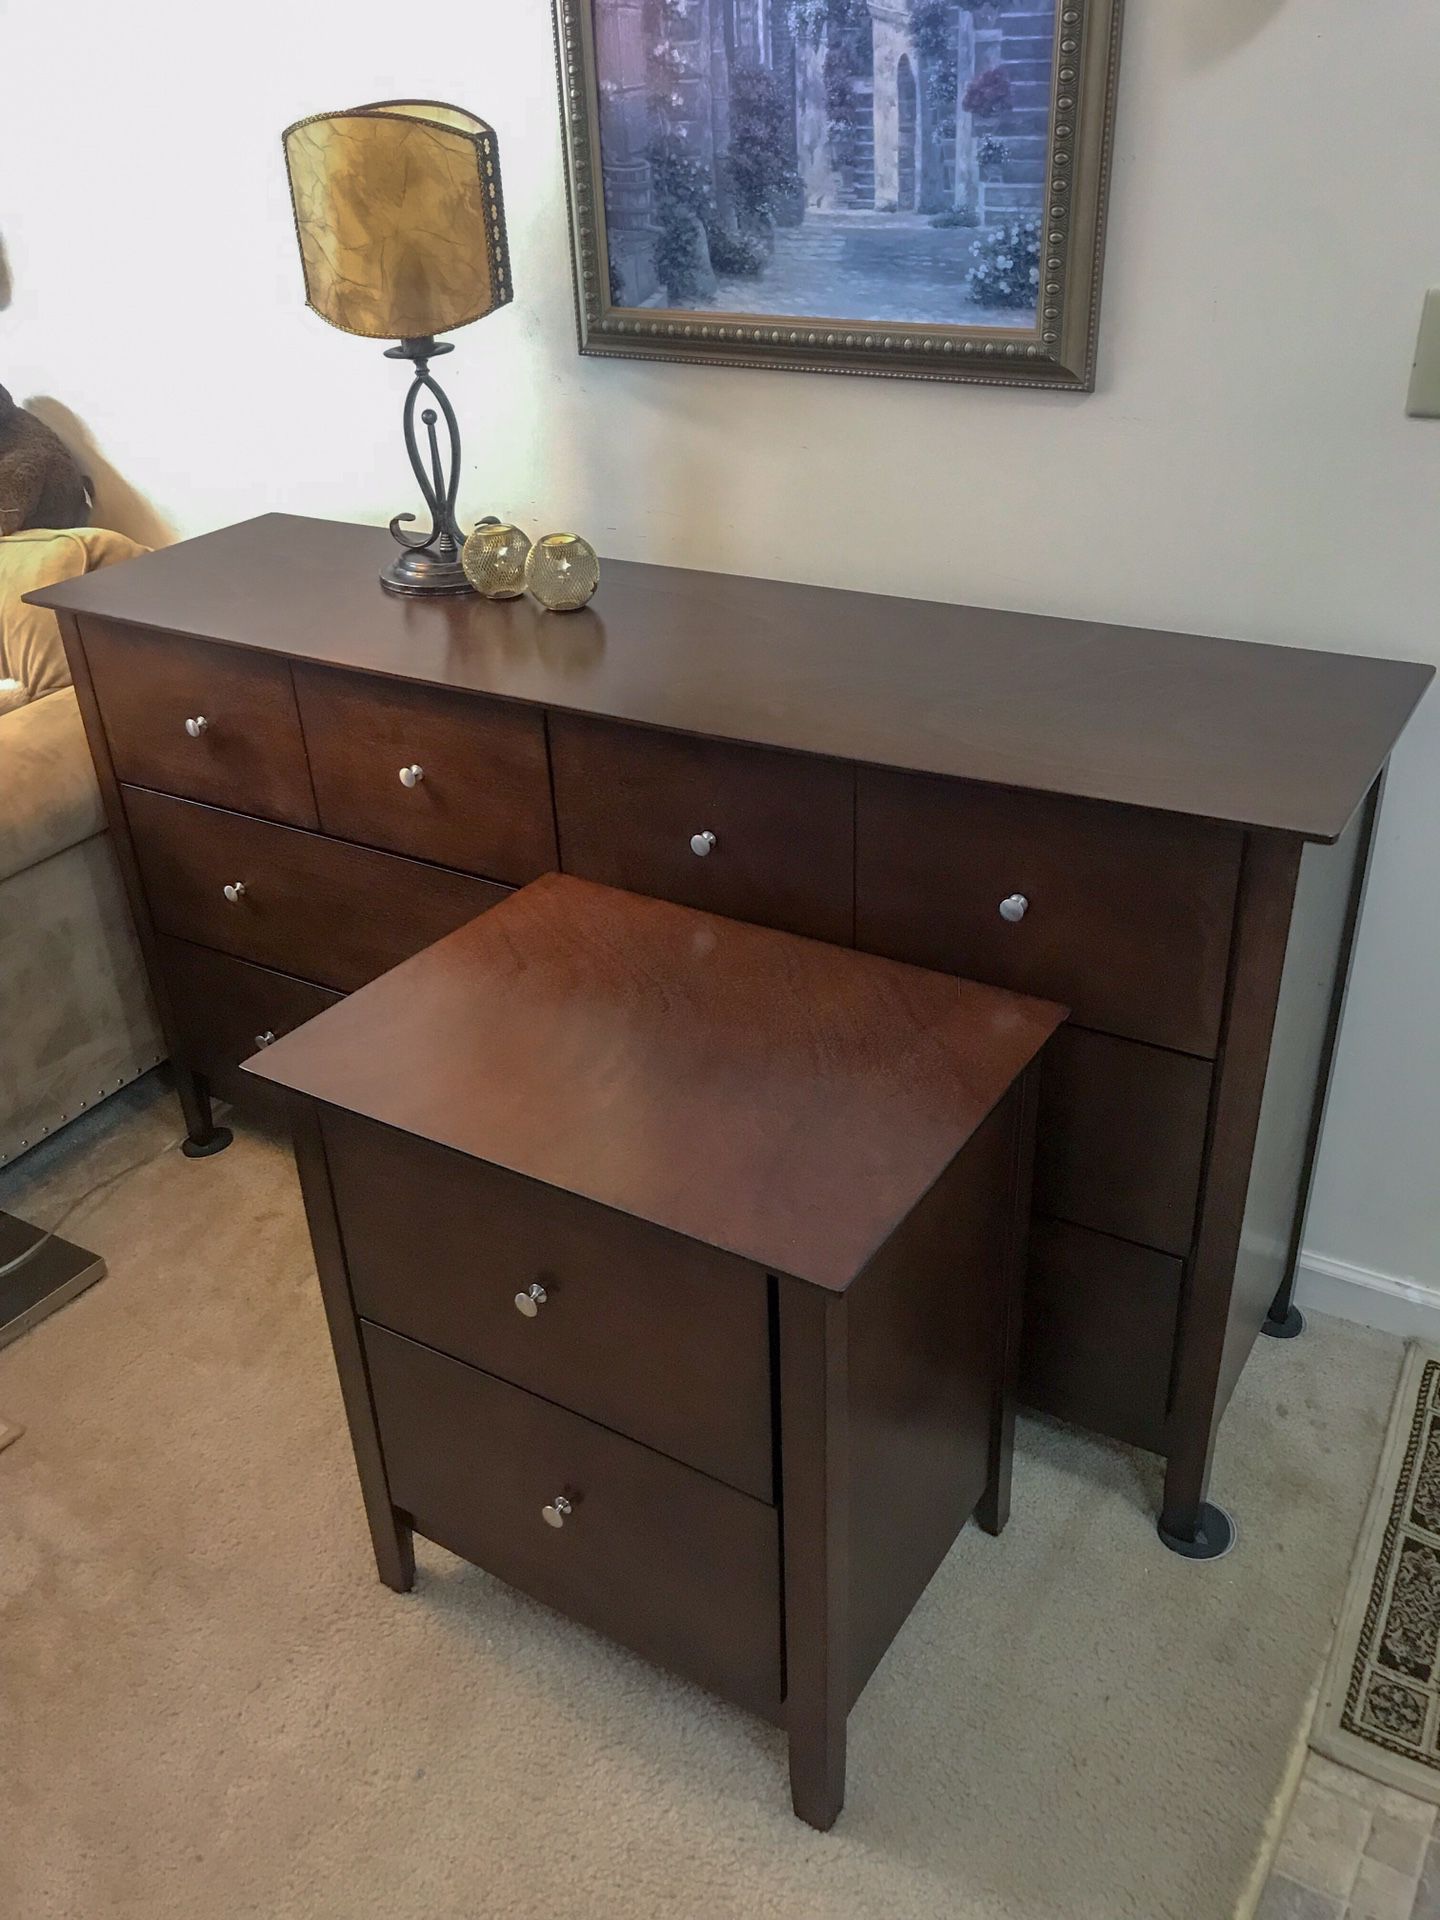 Dresser and nightstand in excellent condition